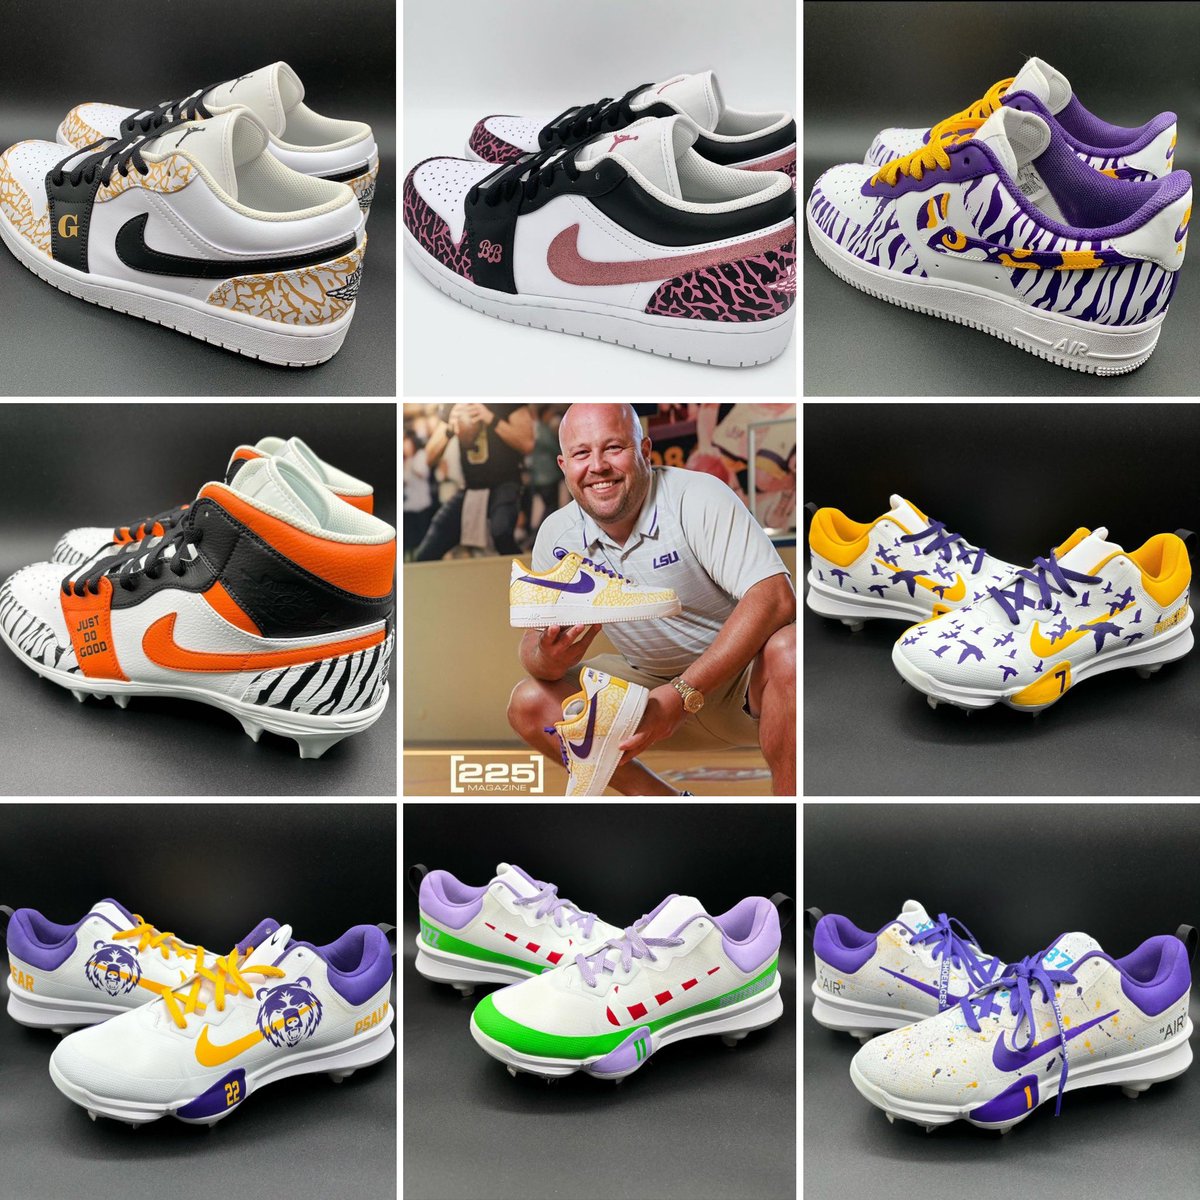 S10 “Shoe Game” Brad Duncan owner/operator of Duncan Custom kicks. We get his amazing story and how he got into creating shoes for @getGordon , @Reese10Angel @CoachBrianKelly @JoeyB and IOTB guests @Milazzo__7 @GavinGuidry5 @joshpearsonbb2 #ThePowerhouse youtu.be/XtZ30Fw_Z0Q?si…